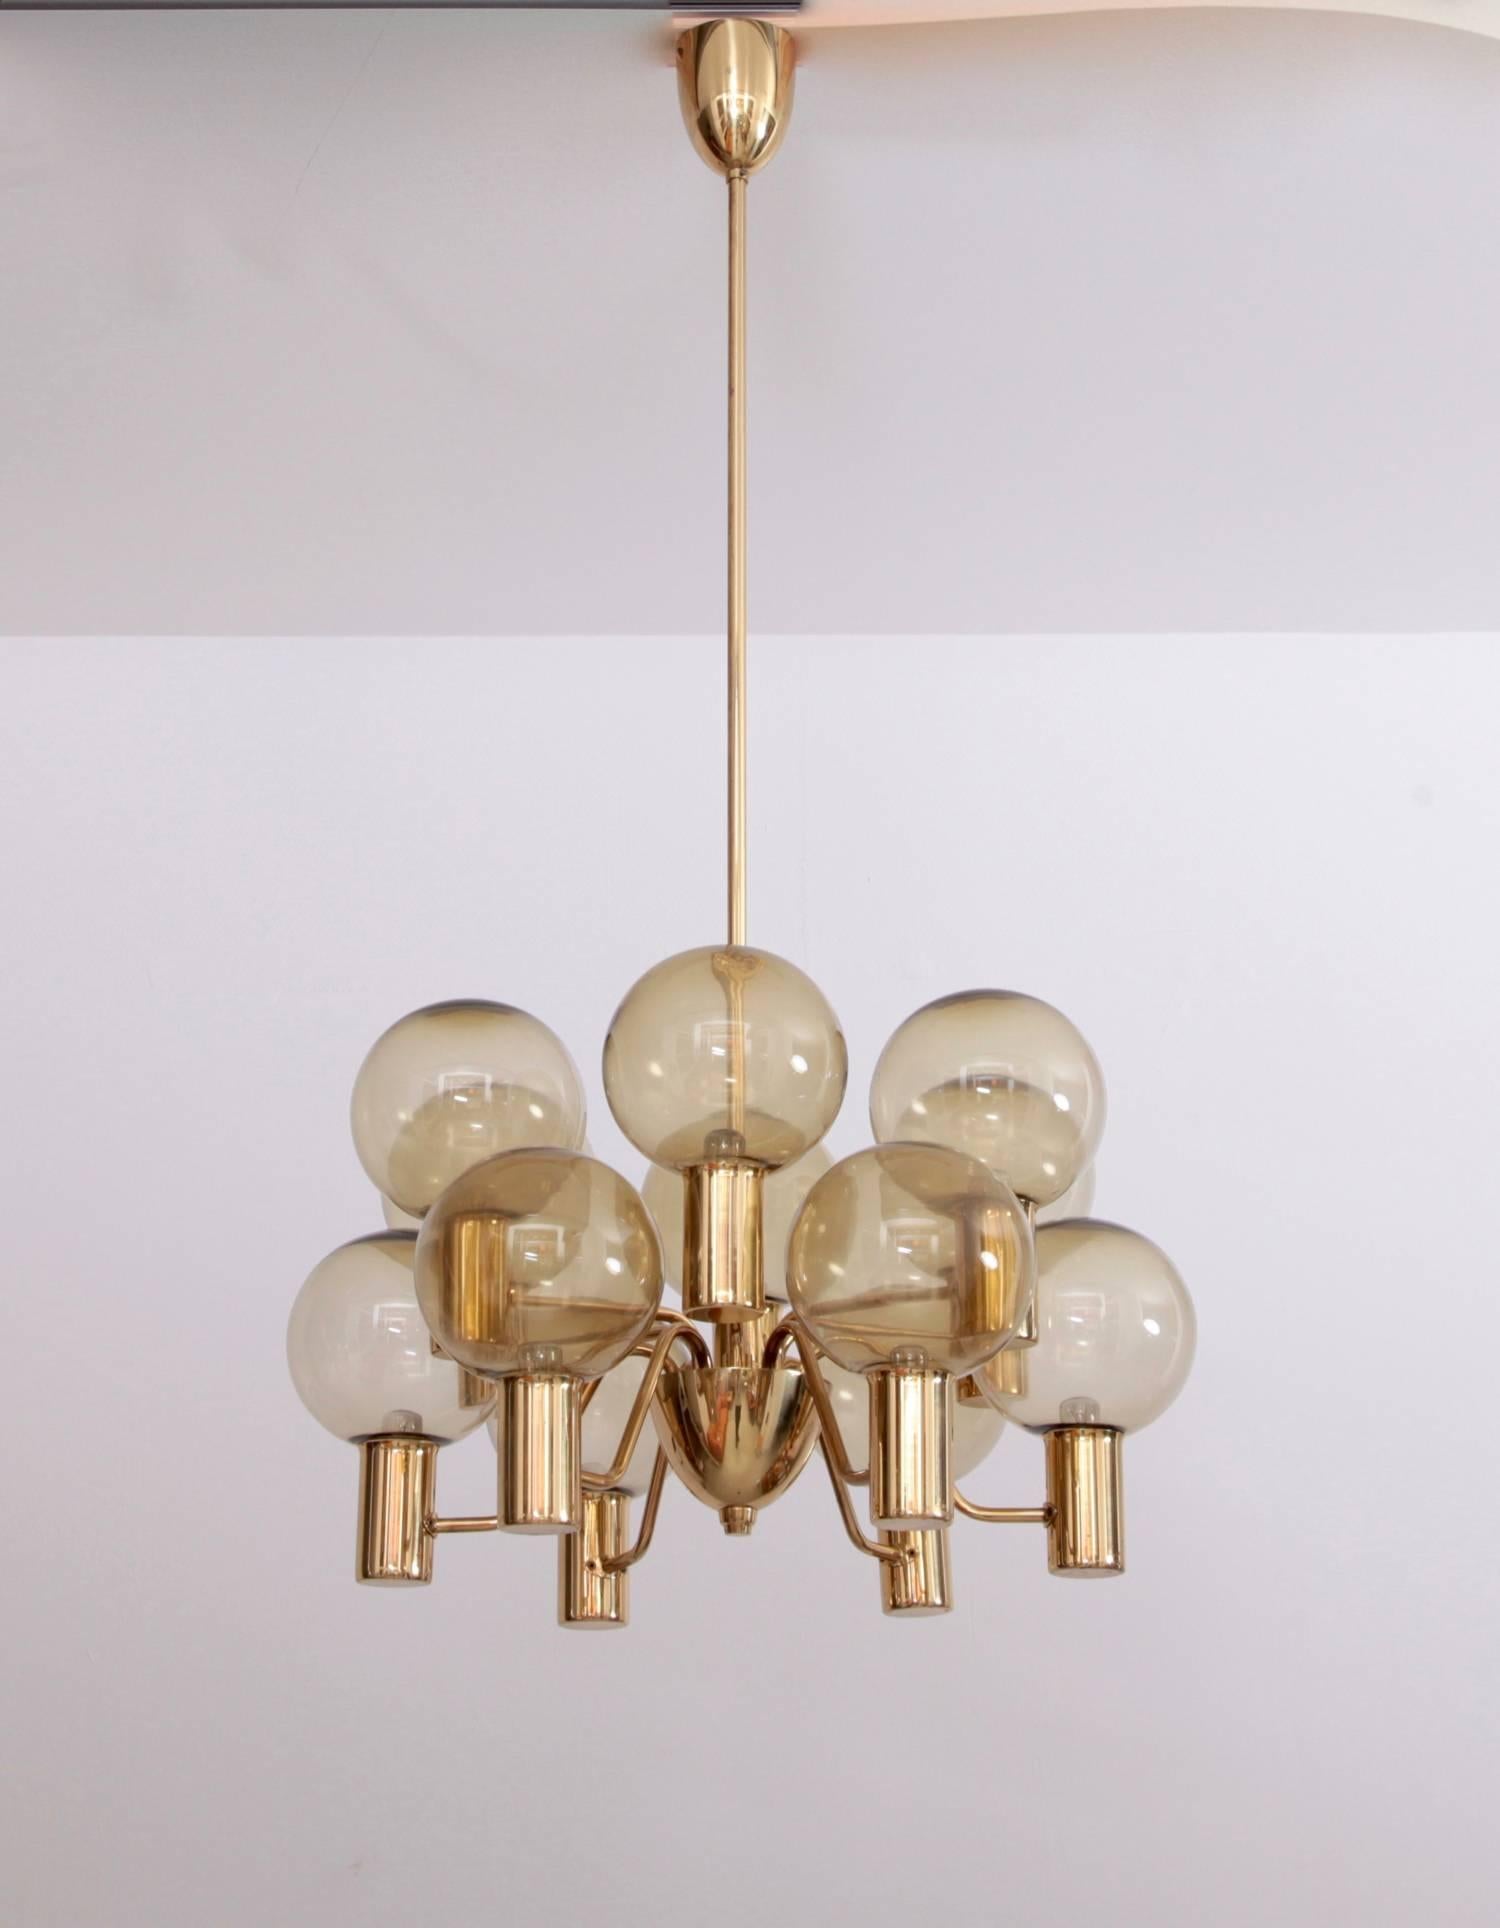 Chandelier with twelve-light sources, featuring a brass frame and smoked glass. It was designed by Hans-Agne Jakobsson and manufactured by Markaryd, Sweden, 1960s.